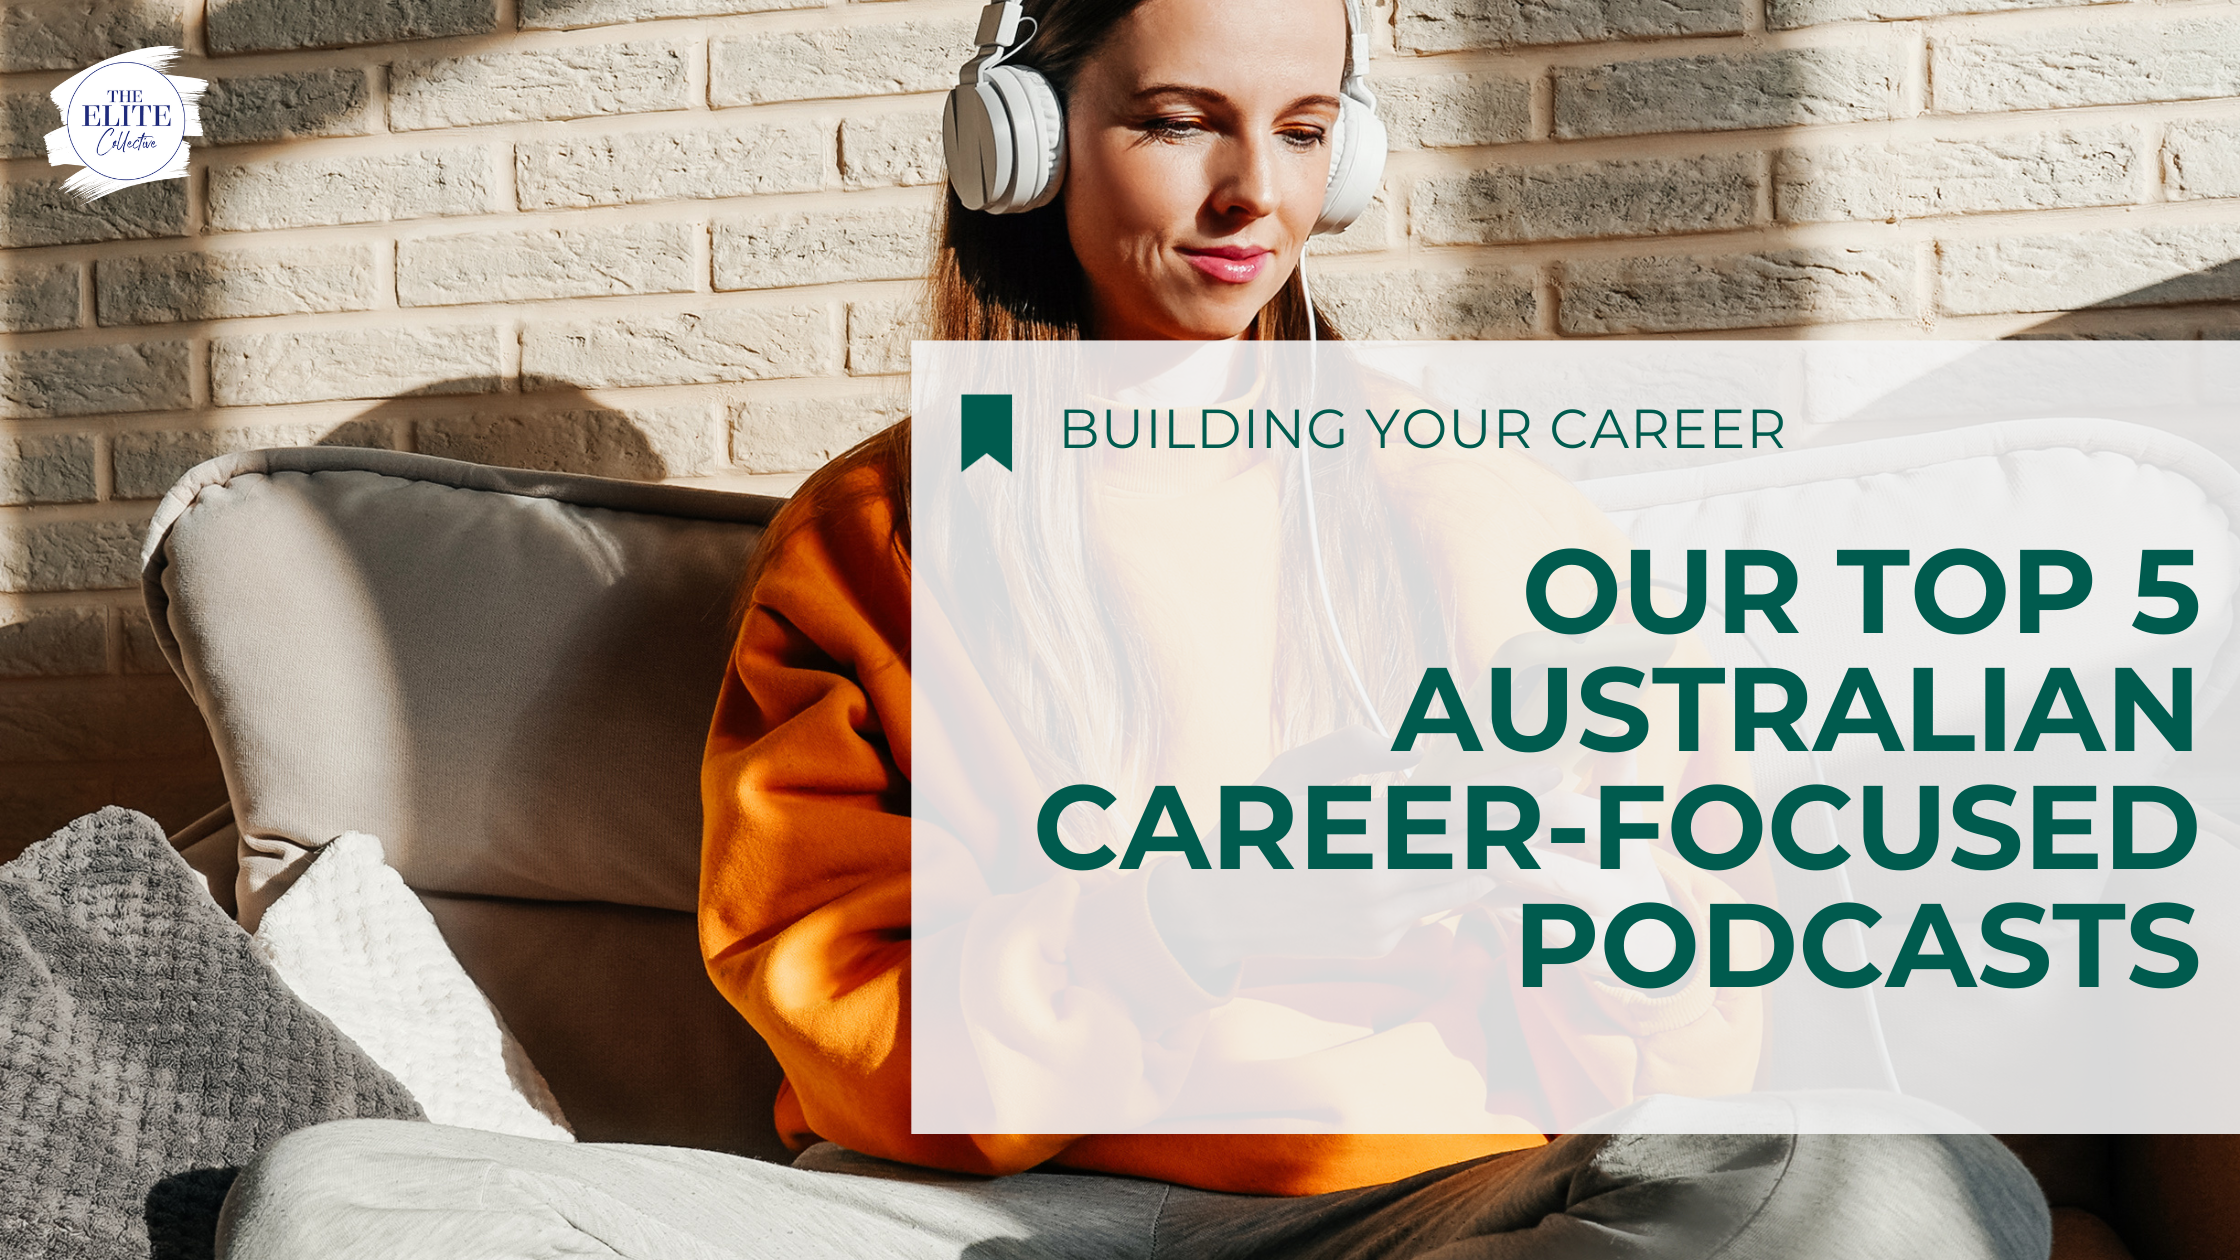 In the background, a white woman wearing an orange jumper lsitens to a podcast in white headphones. the words Our Top 5 Australian Career-Focused Podcasts are imposed over the image.